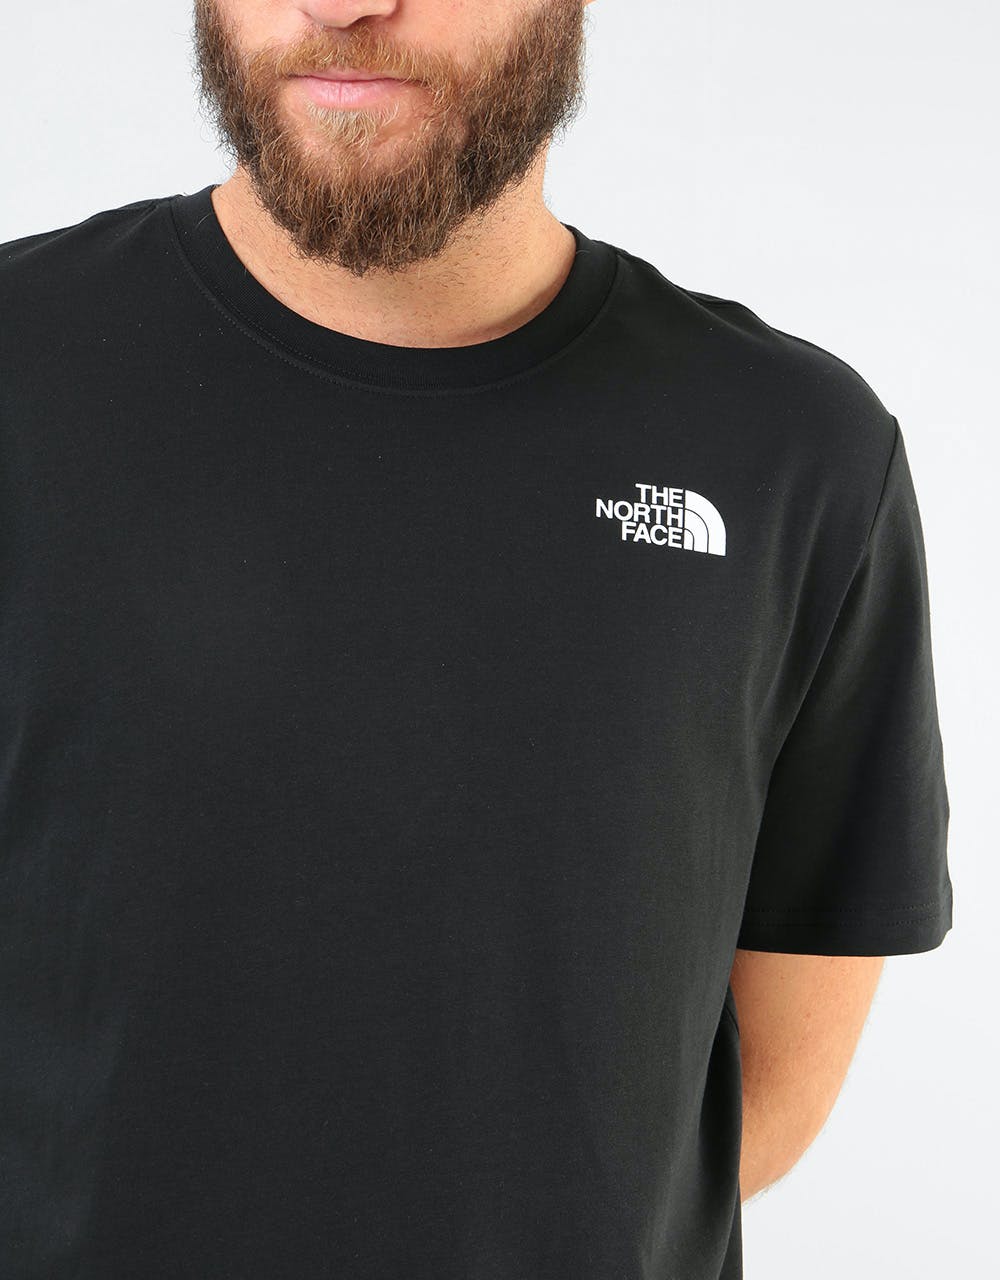 The North Face S/S Red Box Celebration T-Shirt - TNF Black